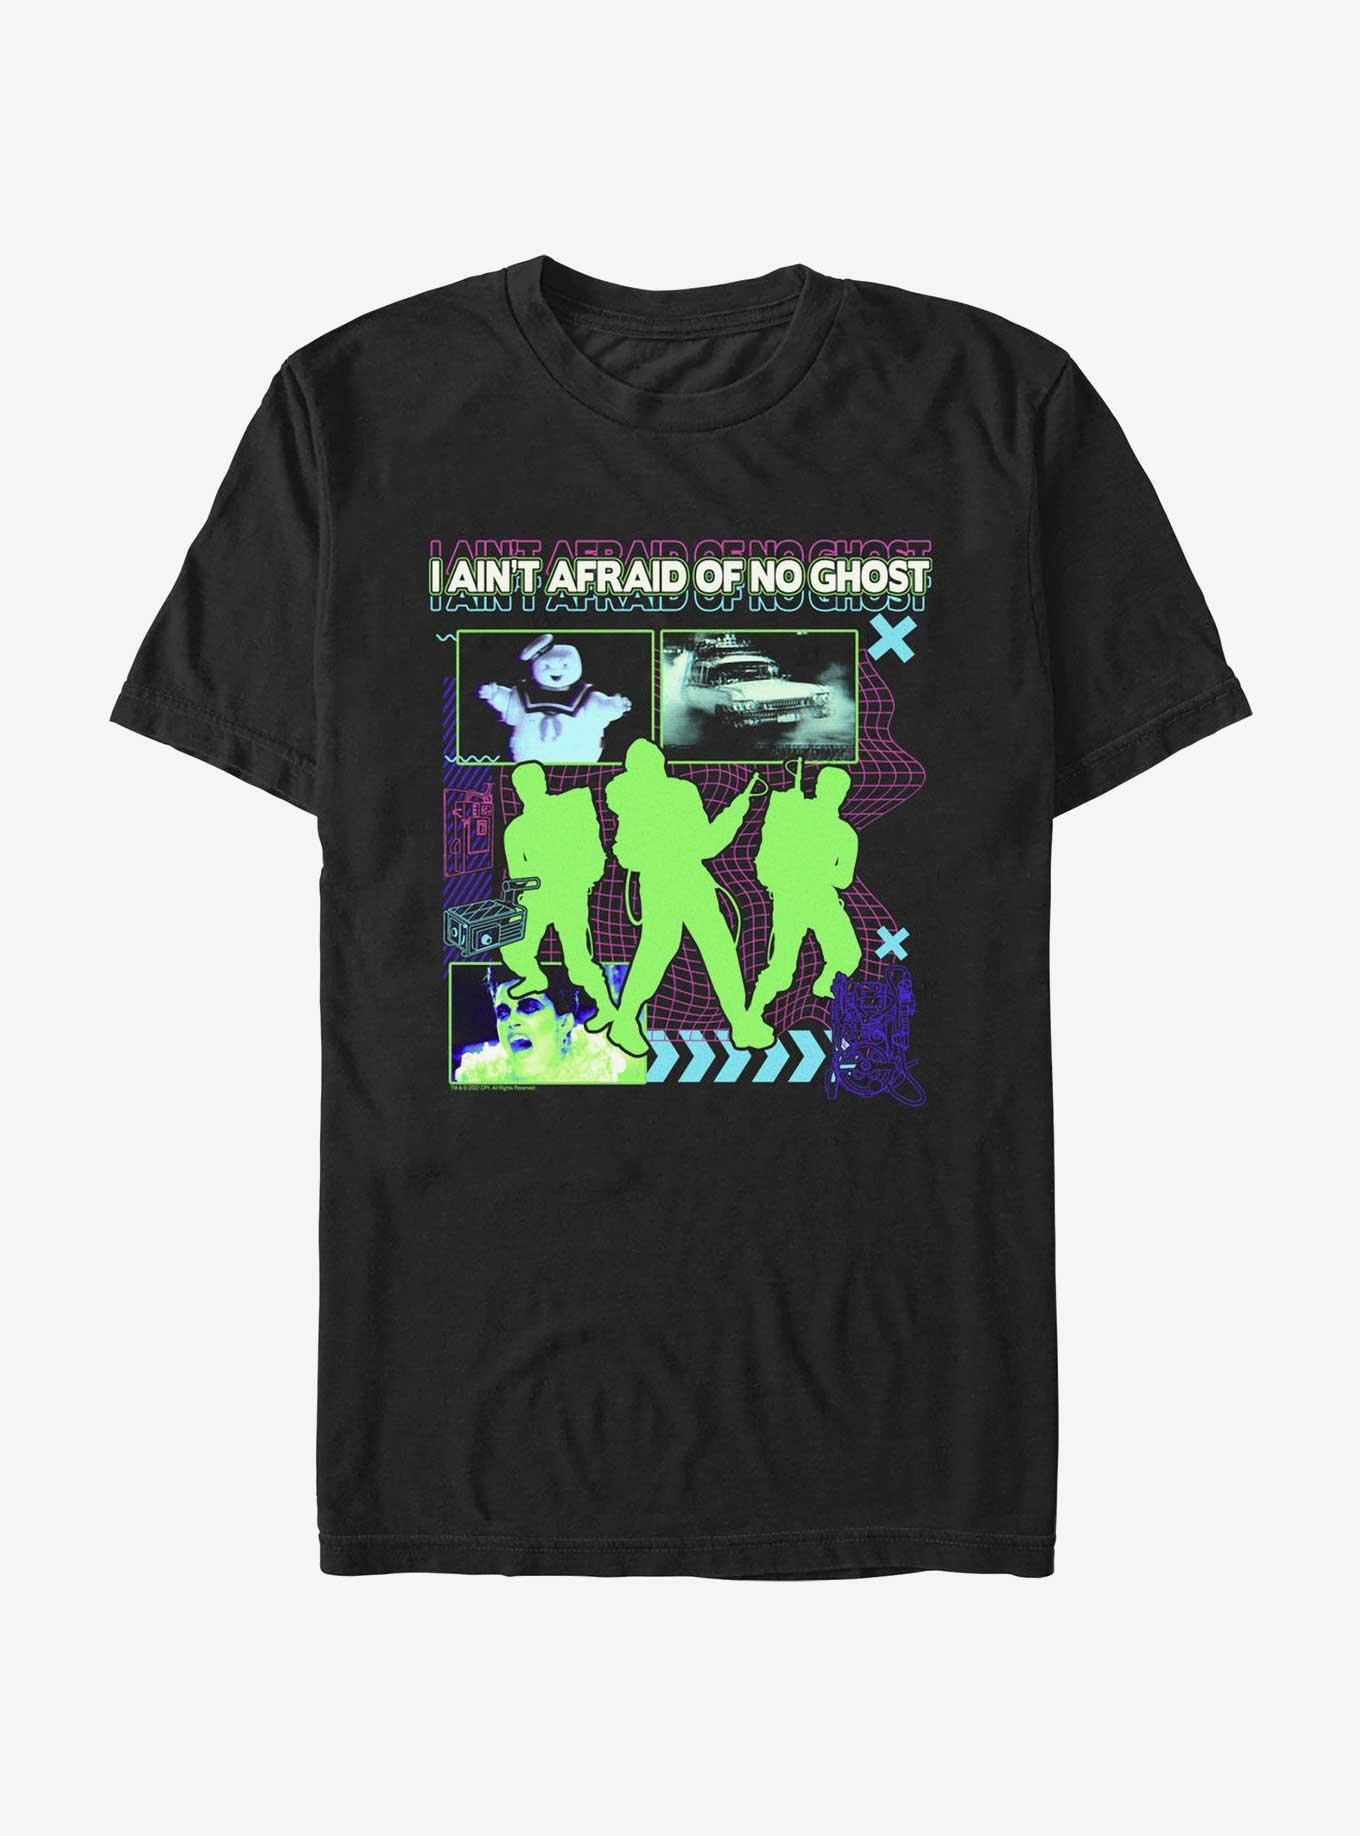 Ghostbusters Afraid Of No Ghost Tech T-Shirt, BLACK, hi-res